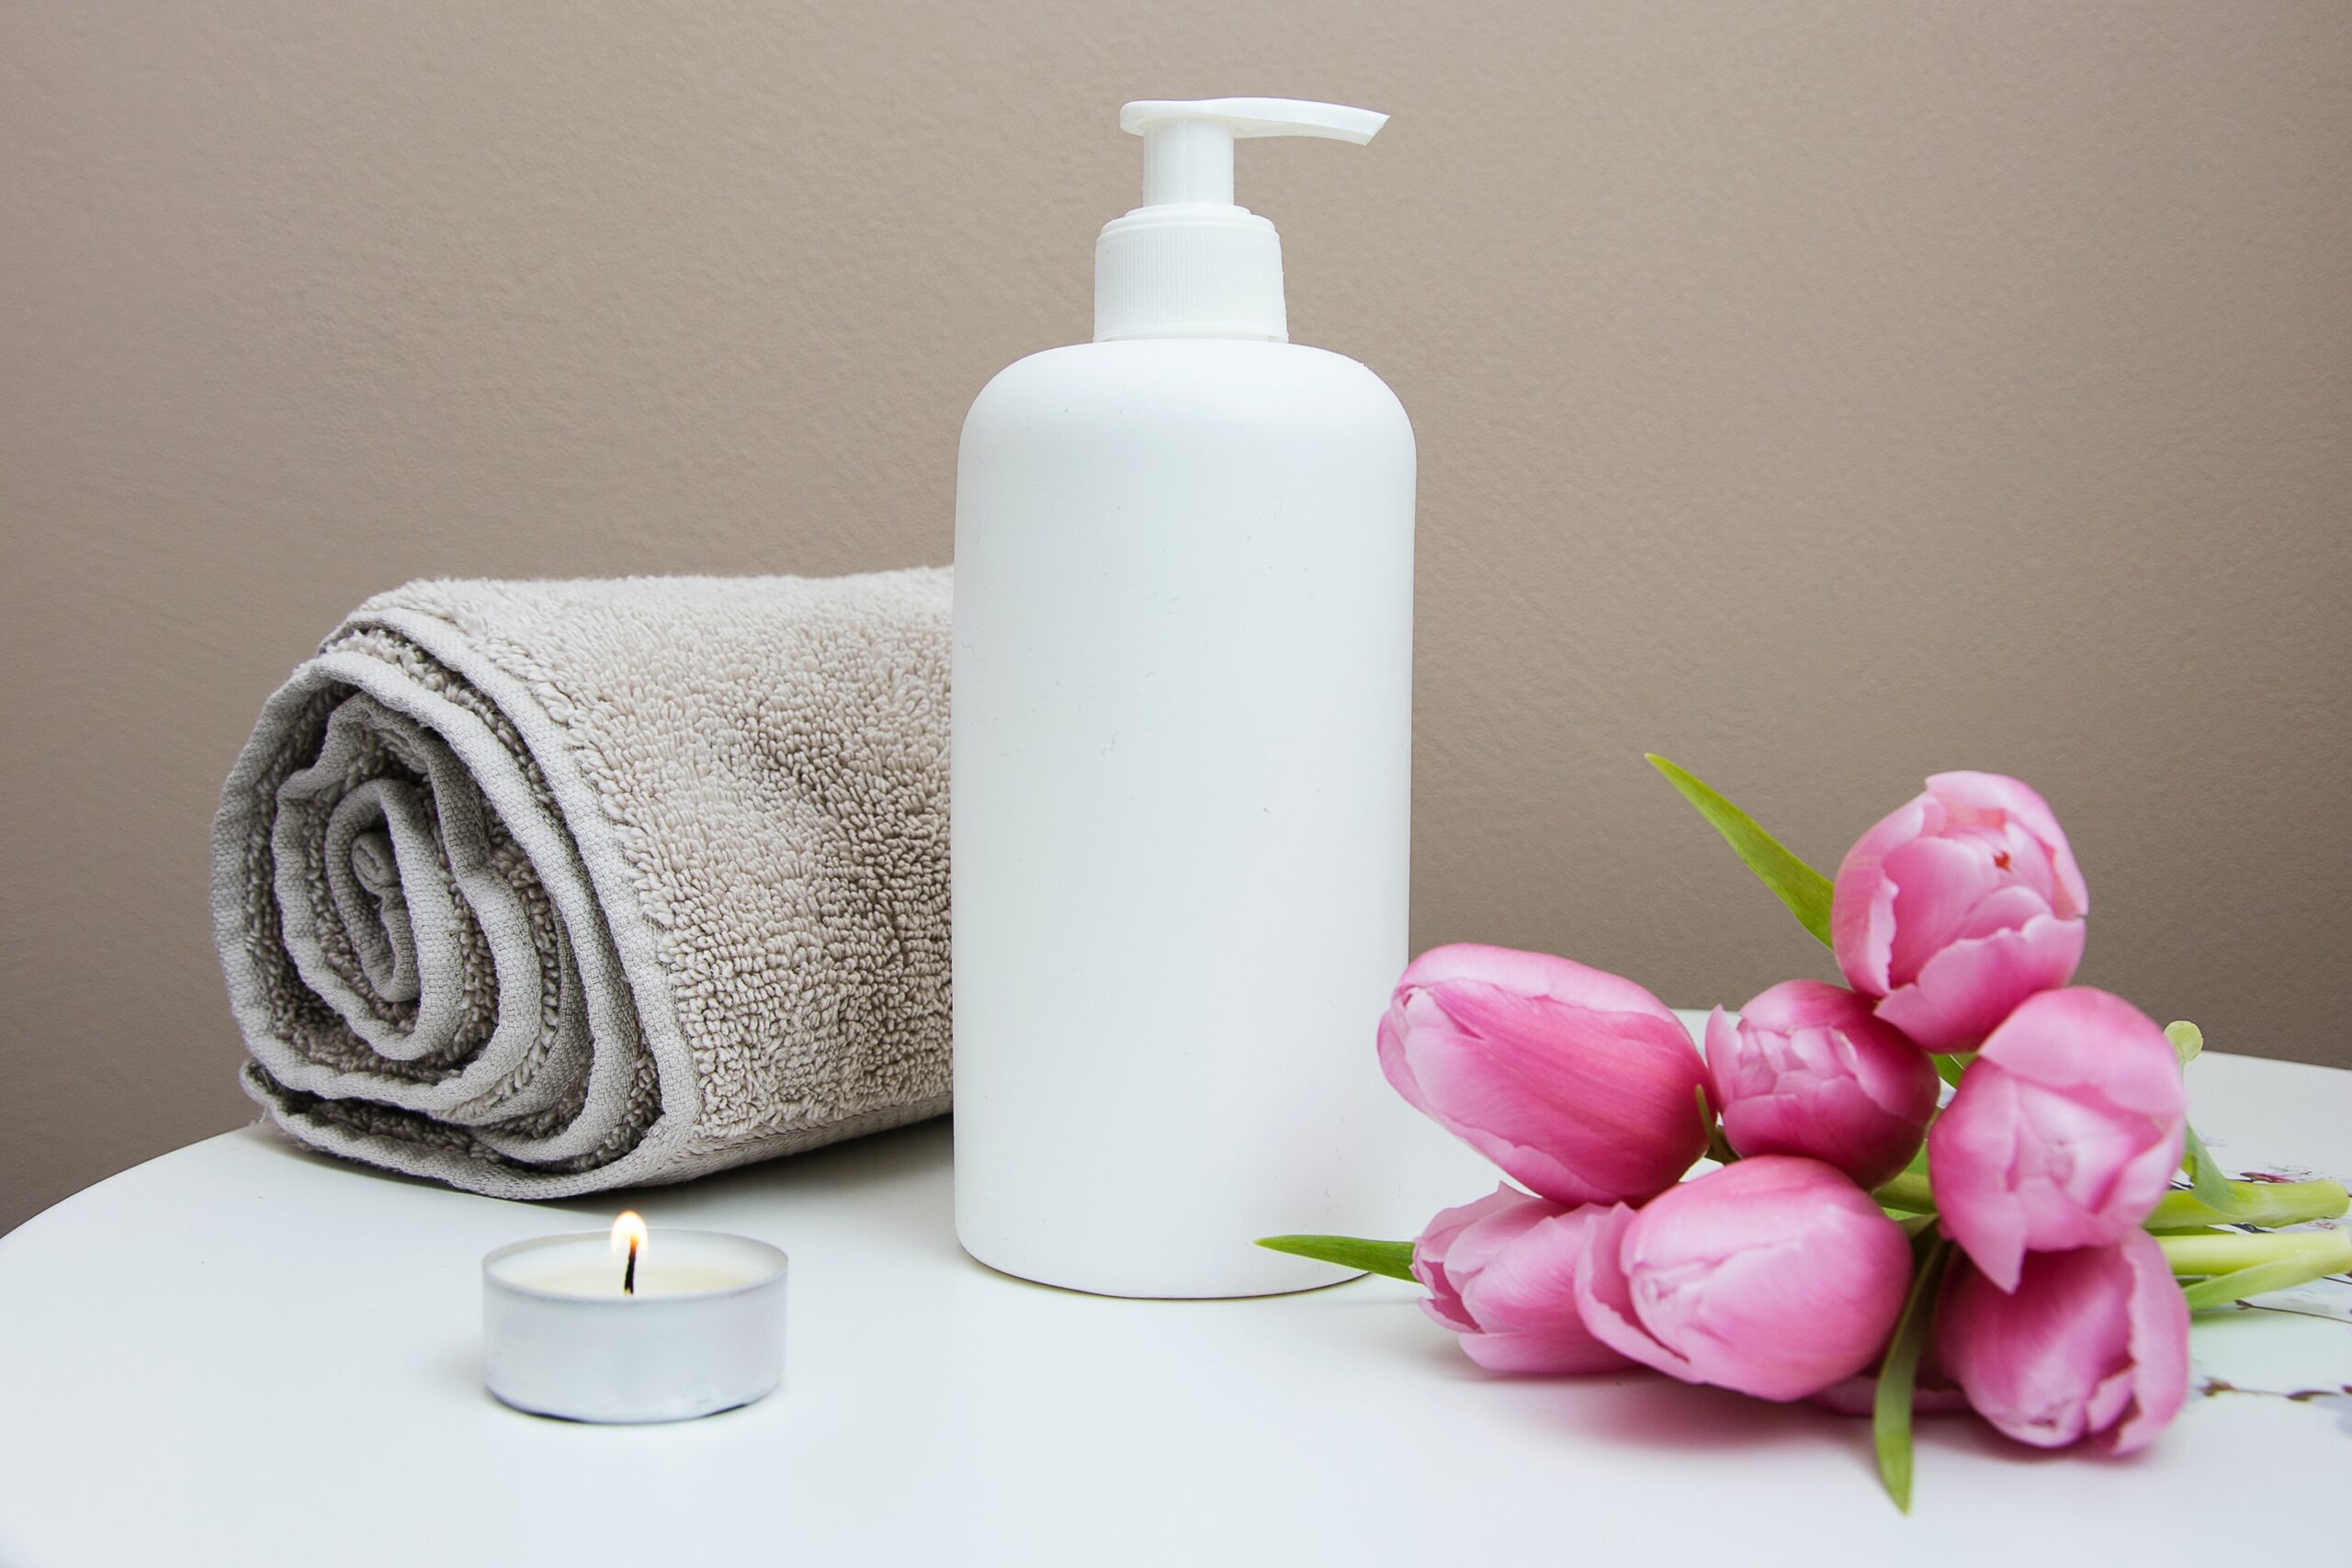 A light brown towel rolled up next to a white lotion bottle. There is a small night light and pink rose on other side of the lotion